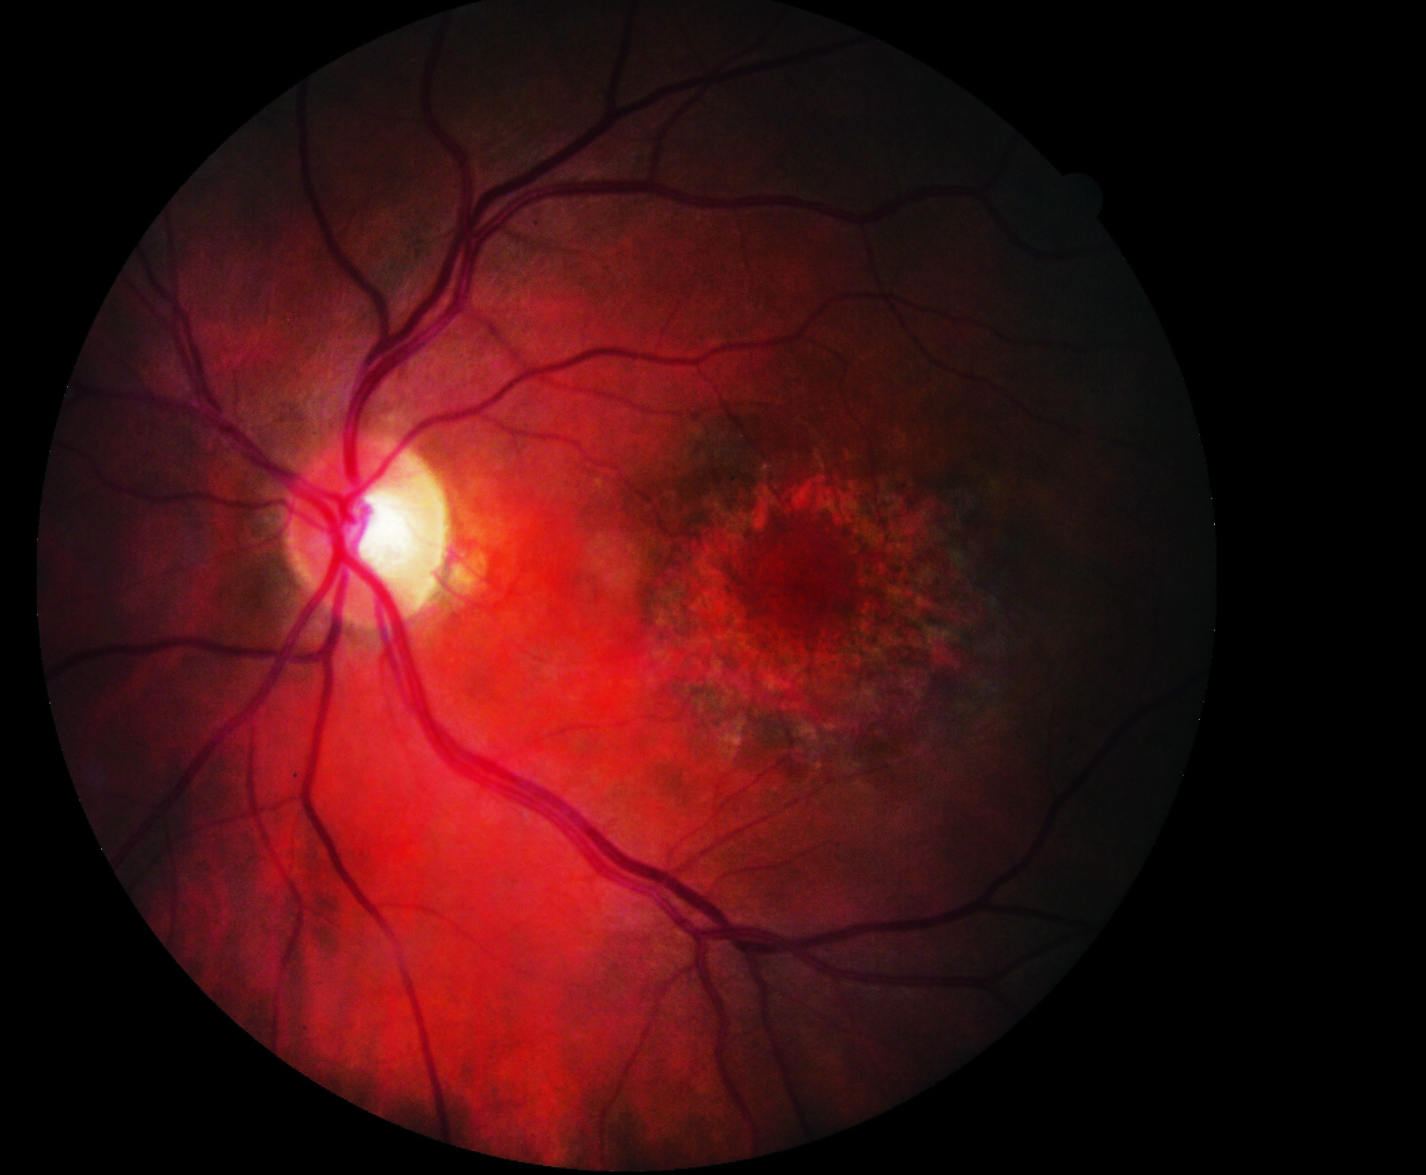 Choroidal volume, vascularity index and luminal volume were significantly lower in patients on hydroxychloroquine, which could be an early indicator of choroidal toxicity.